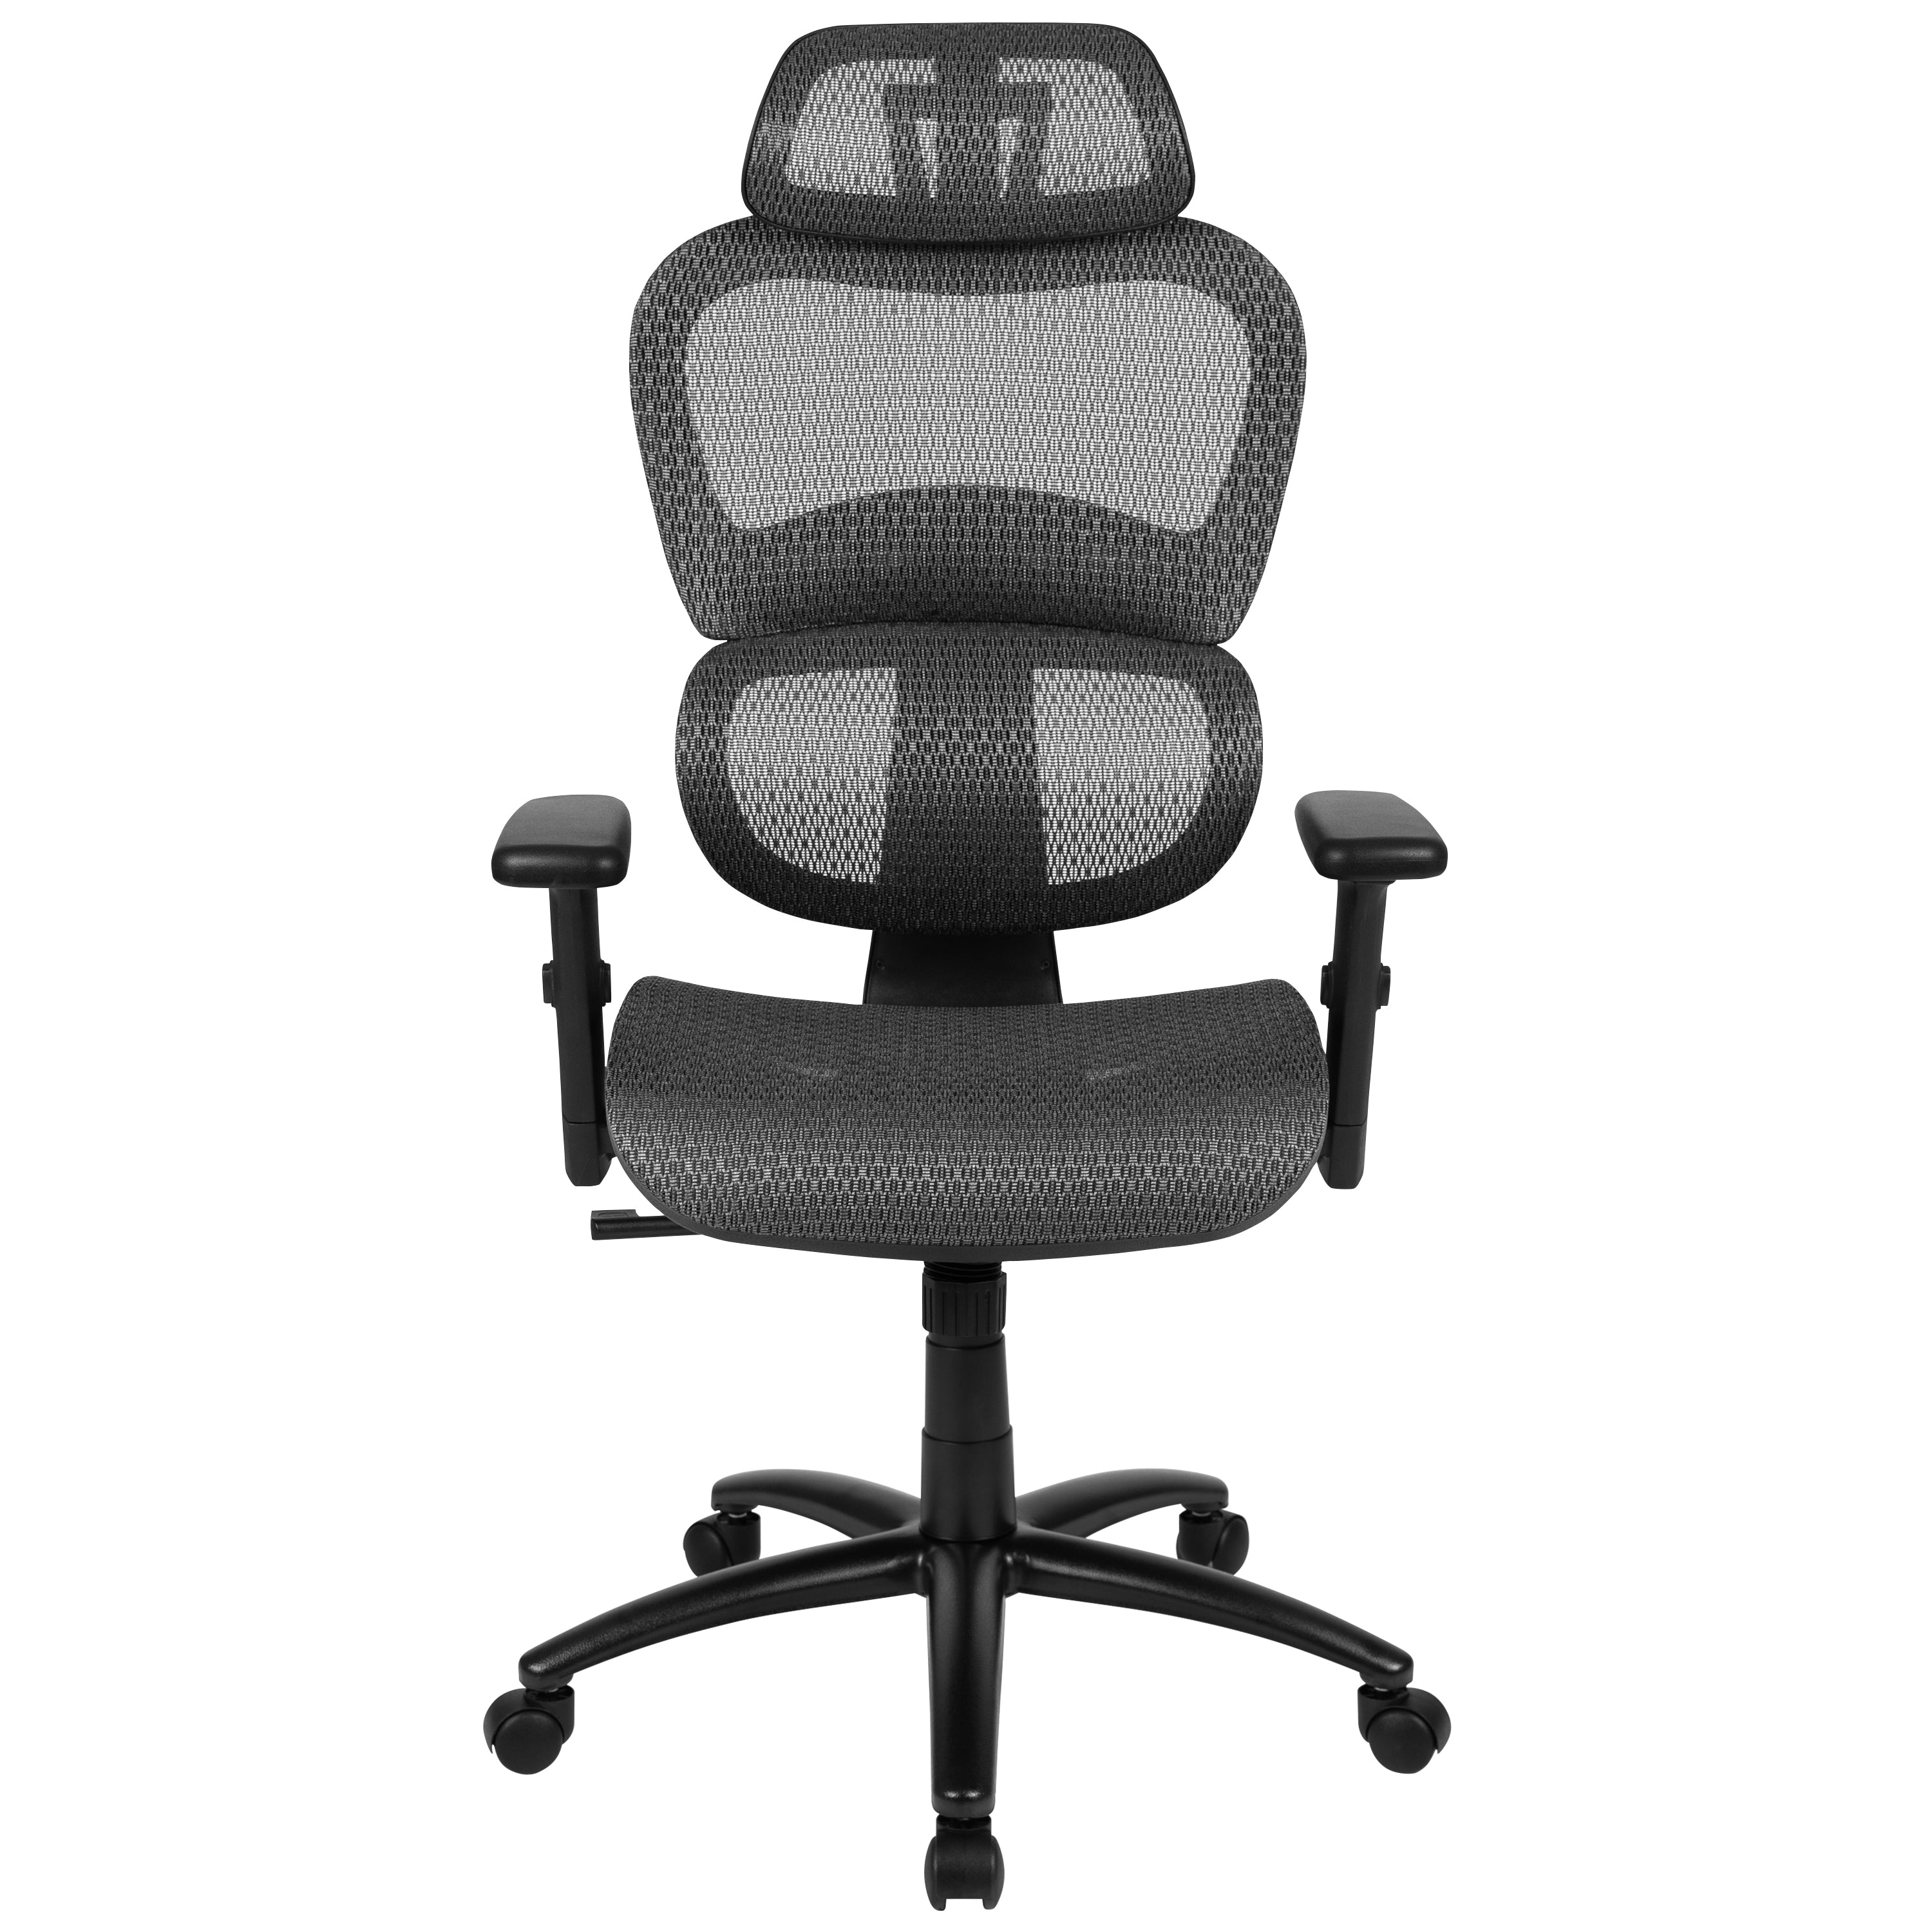 Ergonomic Mesh Office Chair with 2-to-1 Synchro-Tilt, Adjustable Headrest, Lumbar Support, and Adjustable Pivot Arms-Desk Chair-Flash Furniture-Wall2Wall Furnishings